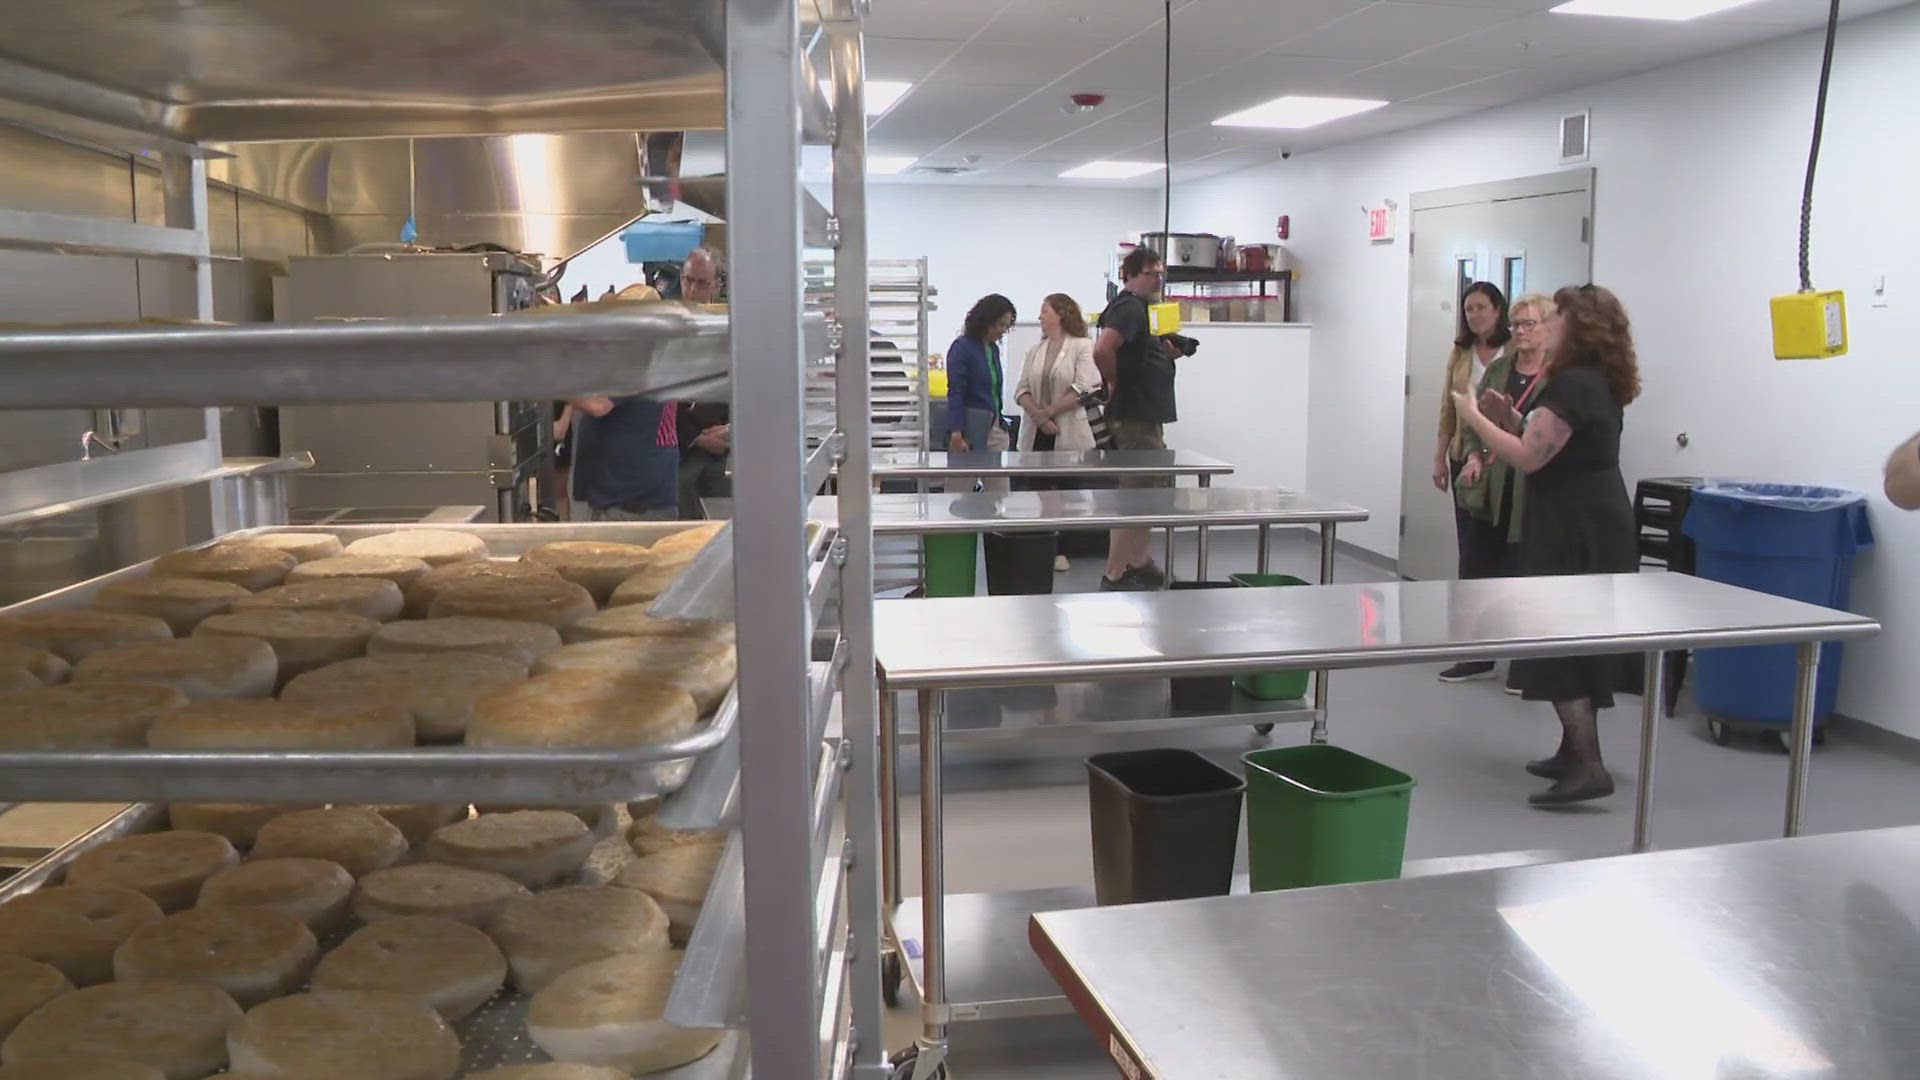 Nearly 200 businesses have utilized nonprofit's kitchen space and other commercial-grade equipment in the past six years.